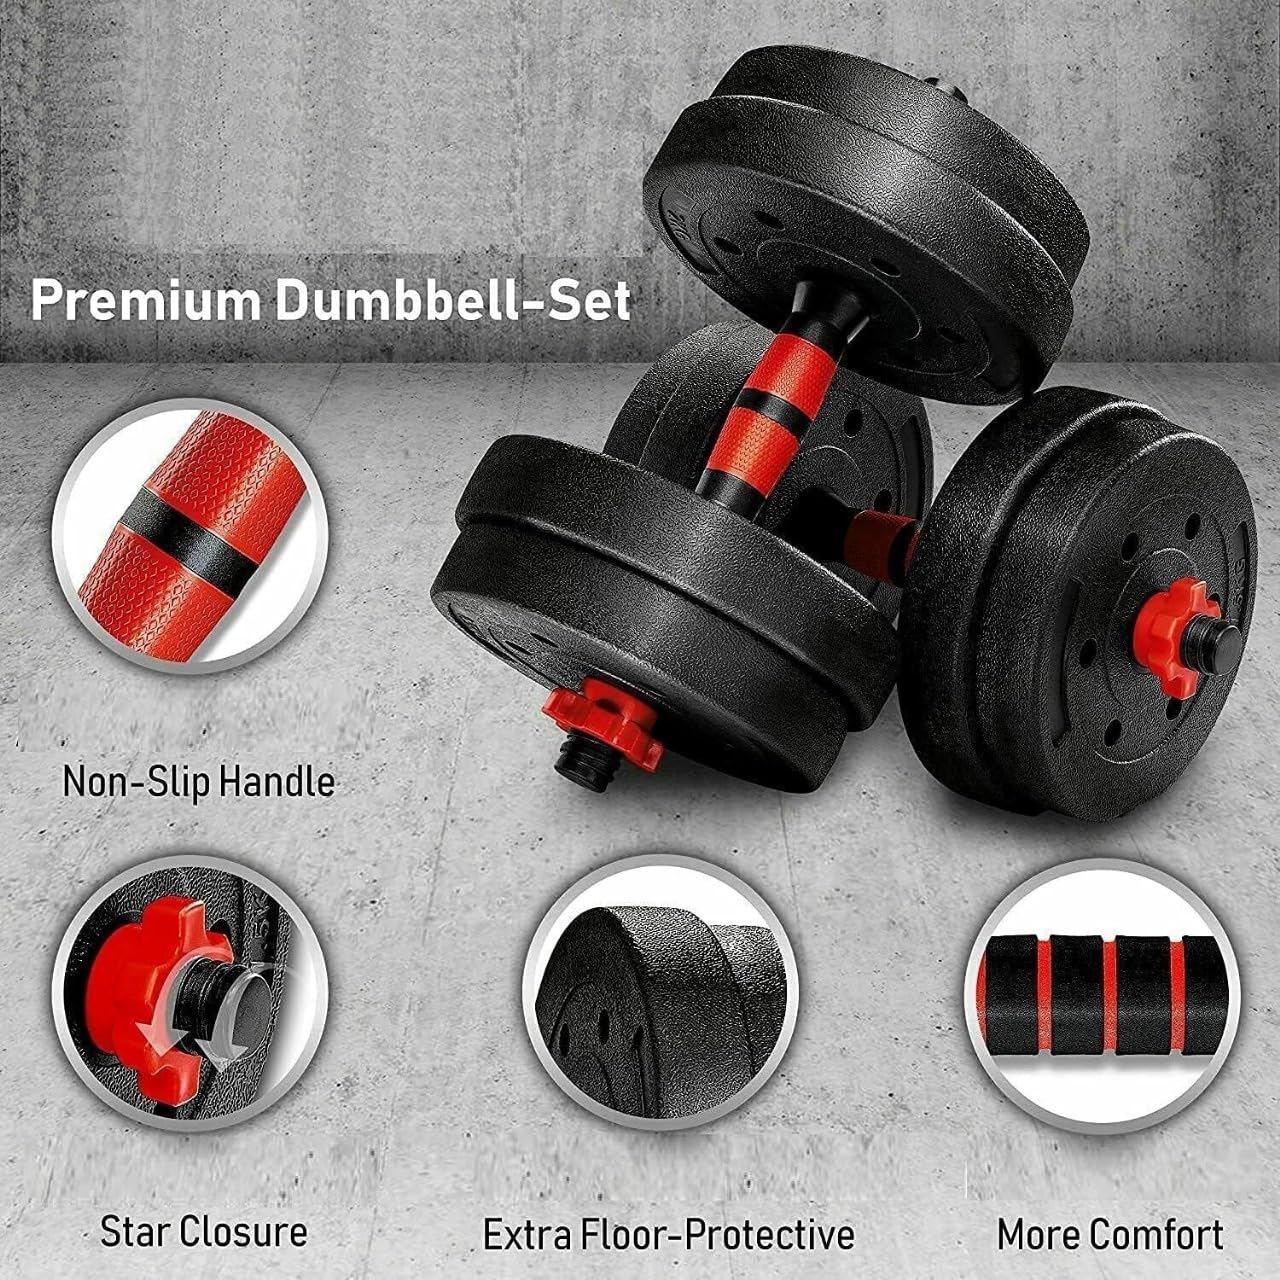 Adjustable Dumbbells Weight Set – 20 Kg Dumbbell Weight with Connecting Rod Used As Barbell, for Men and Women Home Gym Work Out Training Fitness Equipment for All-Purpose.